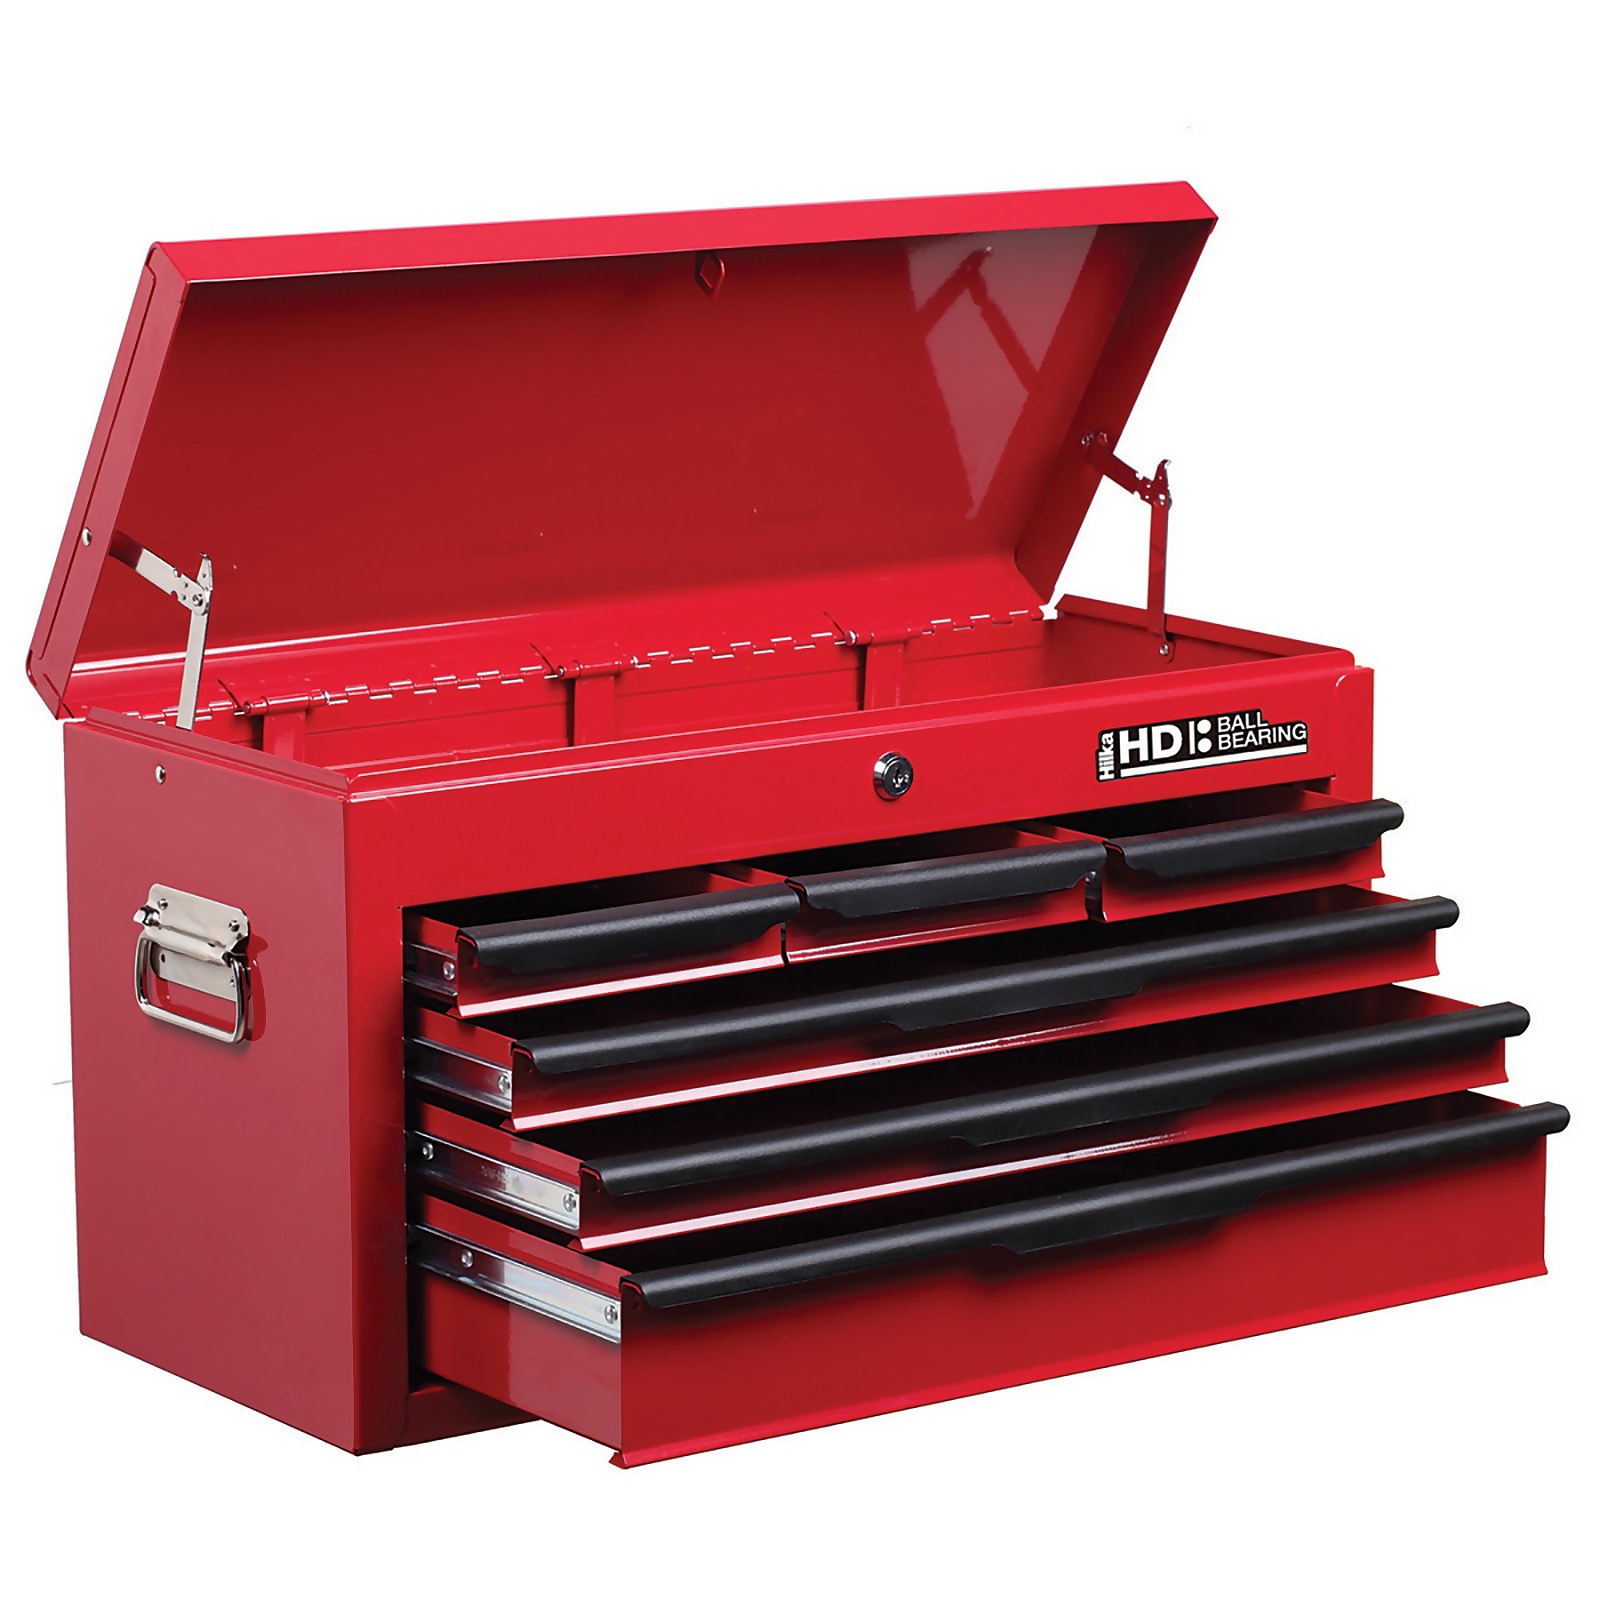 Hilka Heavy Duty 6 Drawer Tool Chest with Ball Bearing Slides